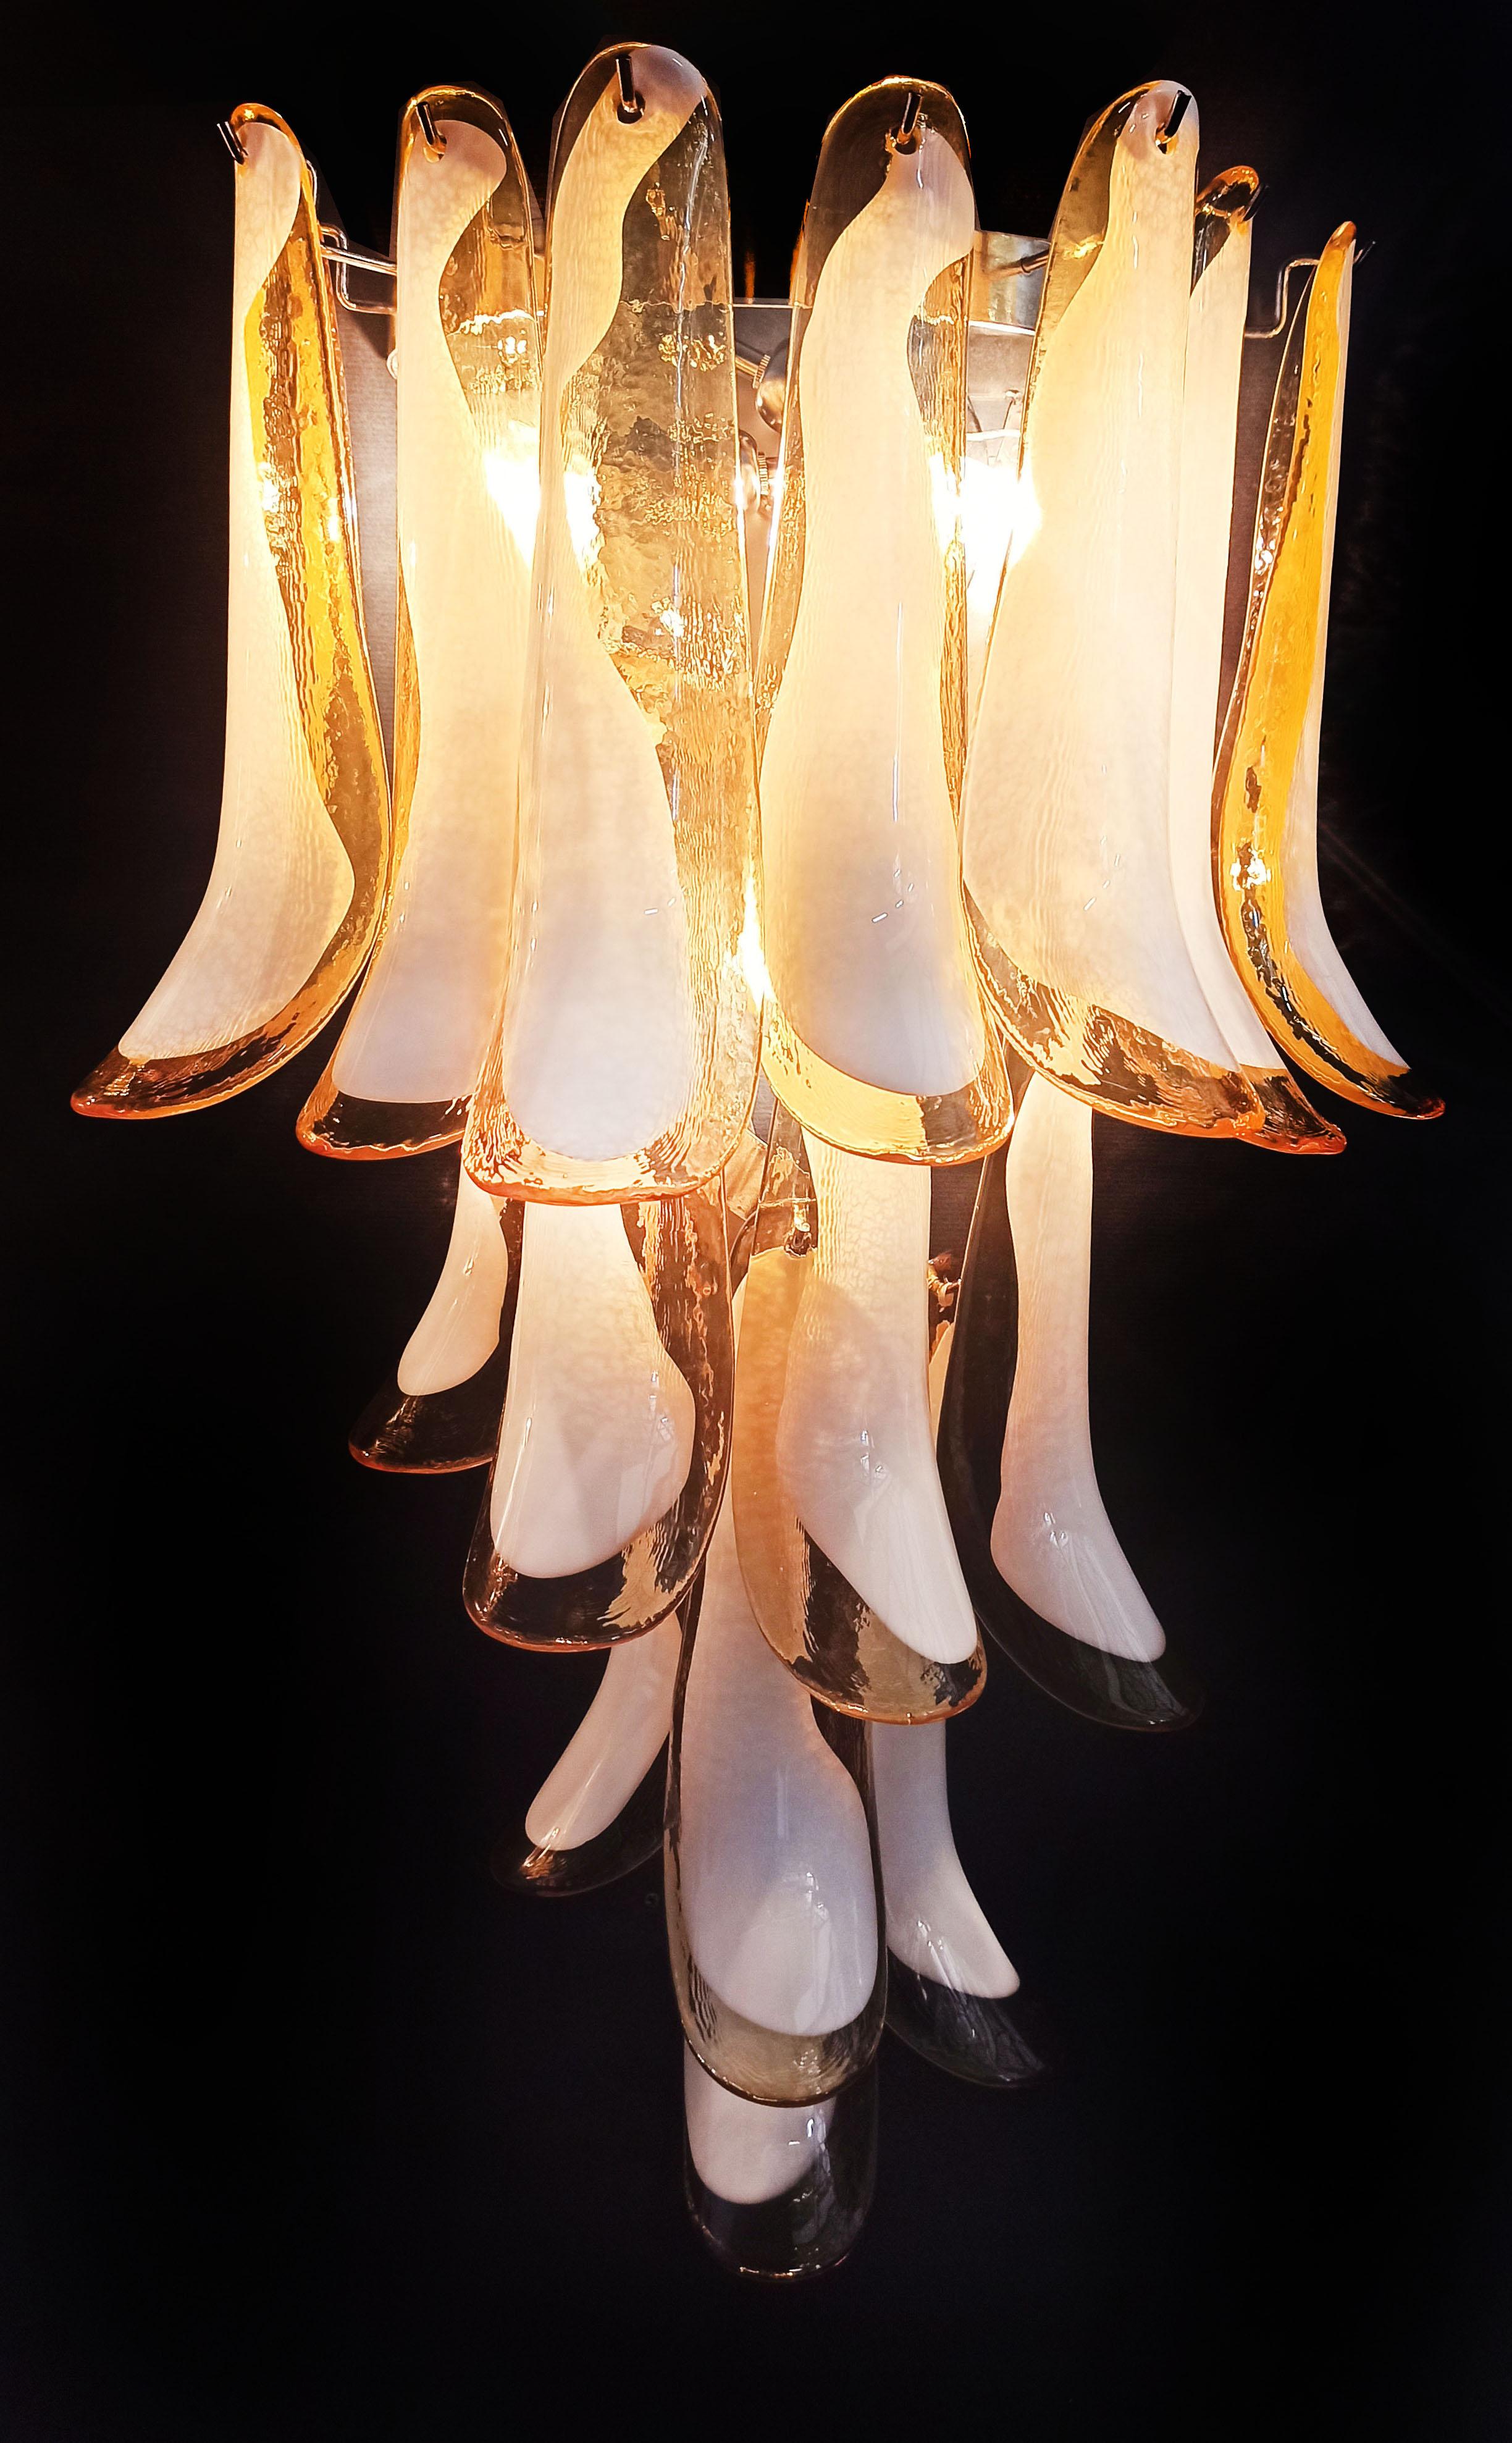 Pair of Vintage Italian Murano Wall Lights, 16 Caramel and Lattimo Glass Petals For Sale 2